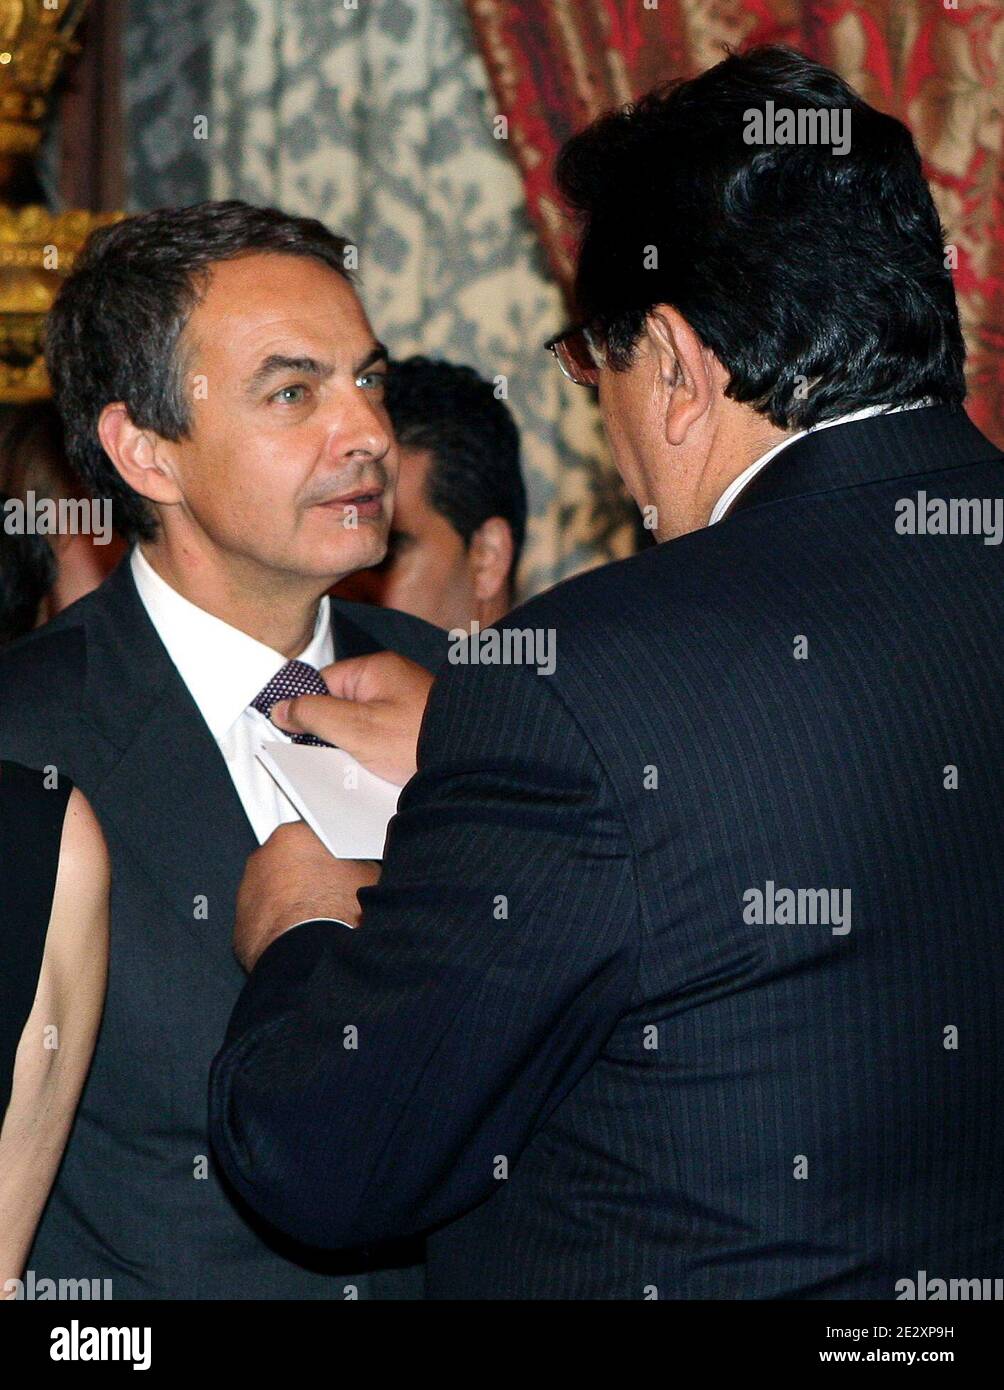 President of Peru, Alan Garcia (R) straightens up Spanish Prime Minister Jose Luis Rodriguez Zapatero's tie knot prior to the gala dinner for European Union and Latin America summit leaders at the Royal Palace in Madrid, Spain on May 17, 2010. This was the first time Prince Felipe replaced his father King Juan Carlos as host of an official dinner at the Royal Palace. The King is still convalescent of last week's operation. Photo by Almagro/ABACAPRESS.COM Stock Photo